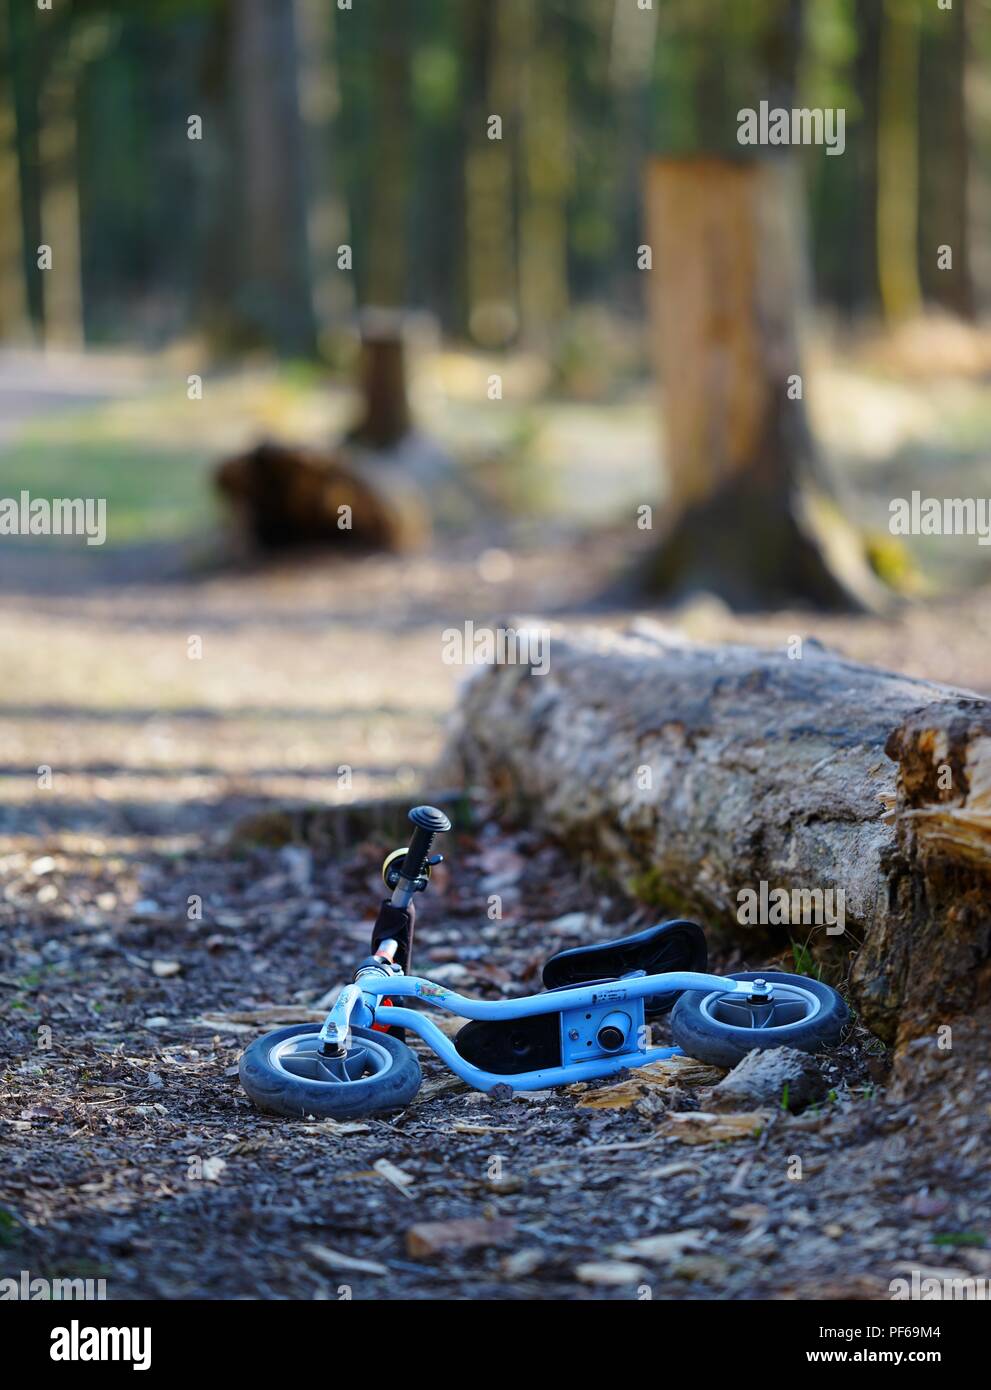 Abandoned scooter in the woods, child toy, blue Stock Photo